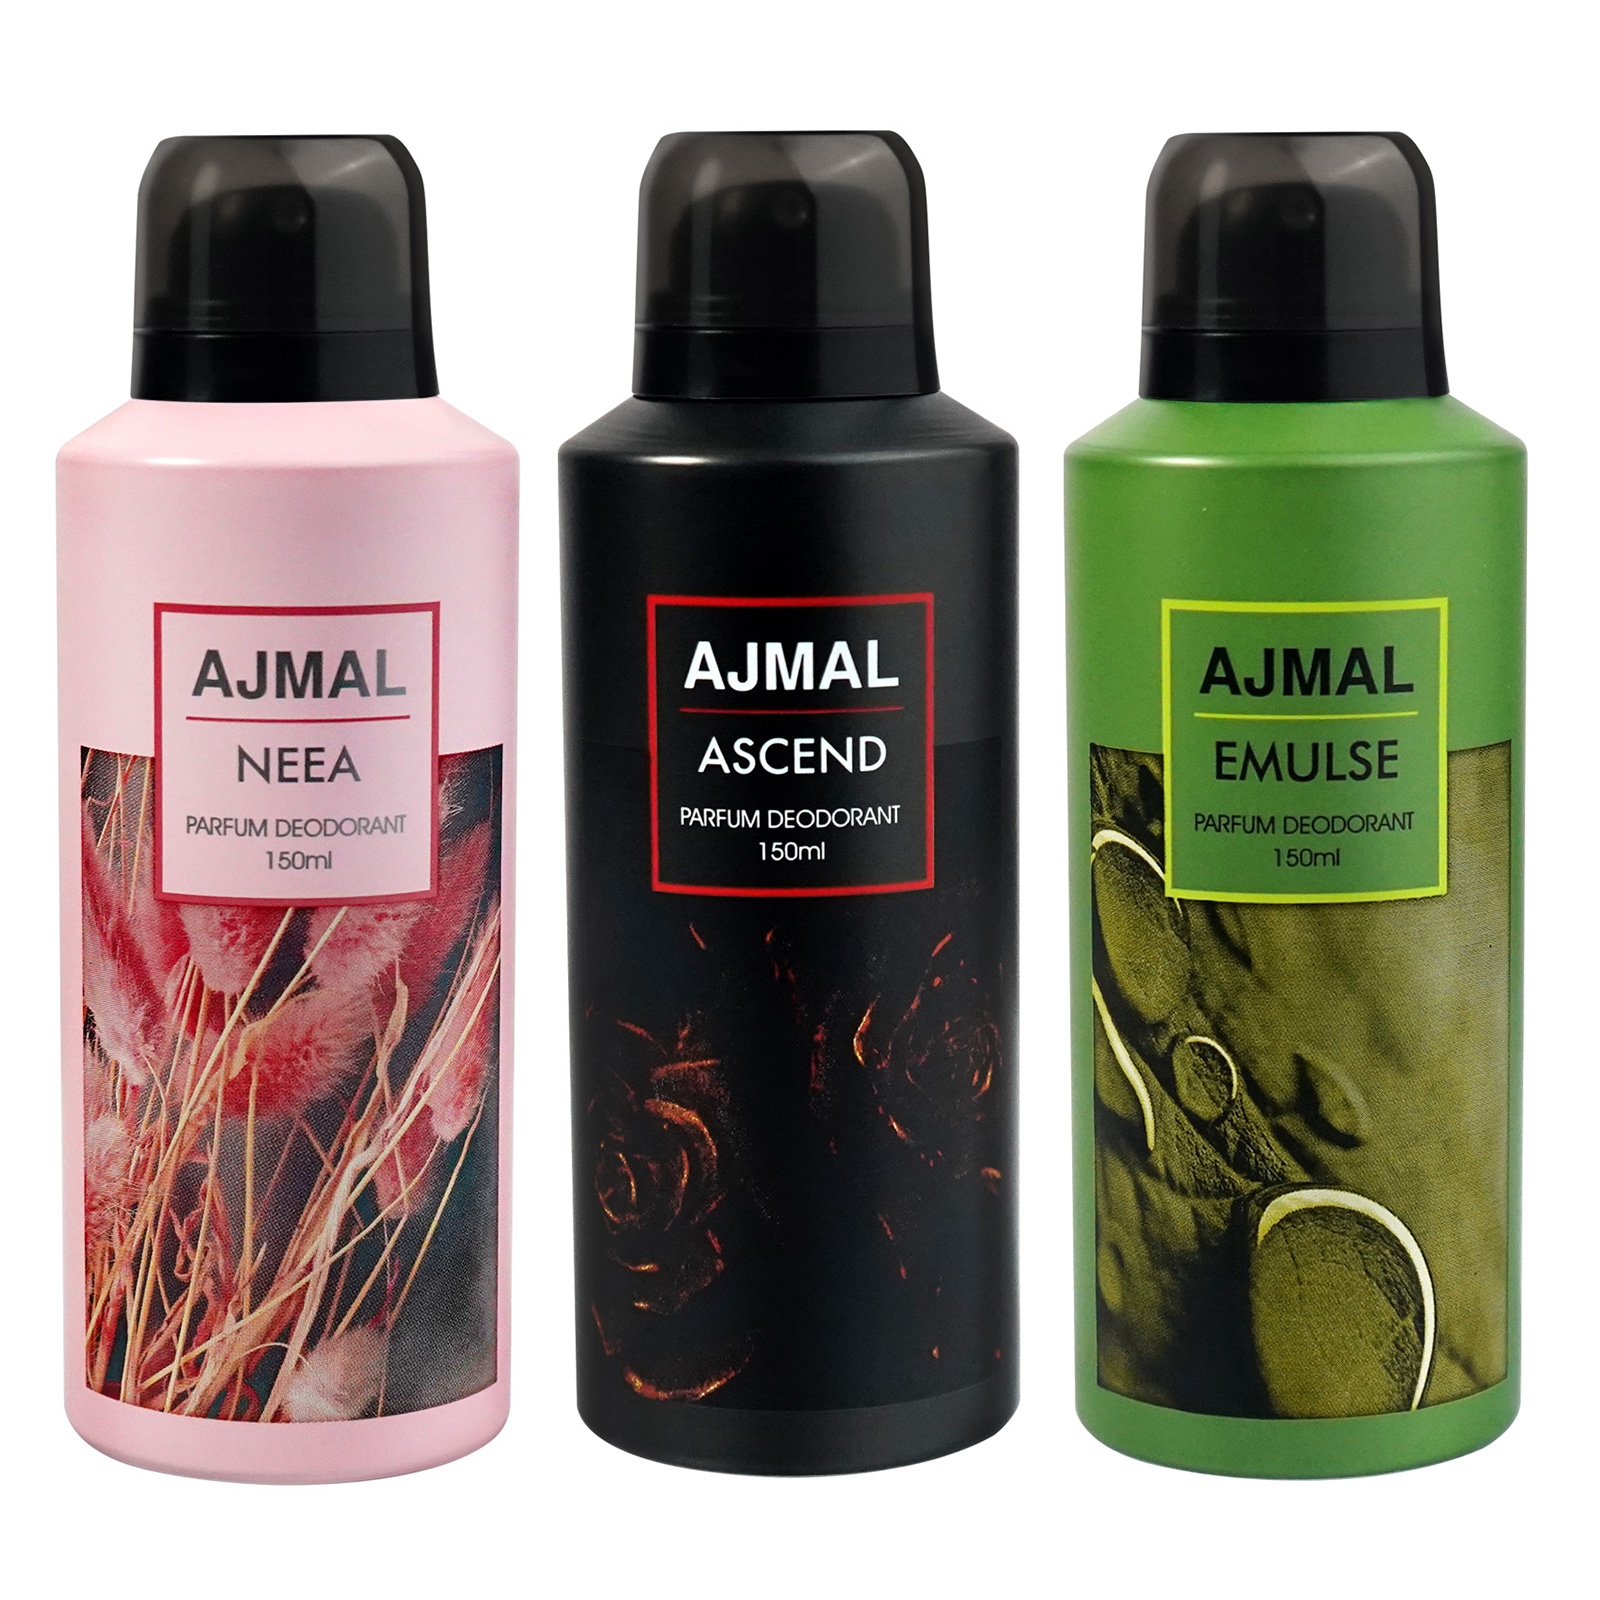 Ajmal | Ajmal Neea, Ascend and Emulse Deodorant Perfume 150ML Each Long Lasting Spray Party Wear Gift For Men and Women Online Exclusive 0